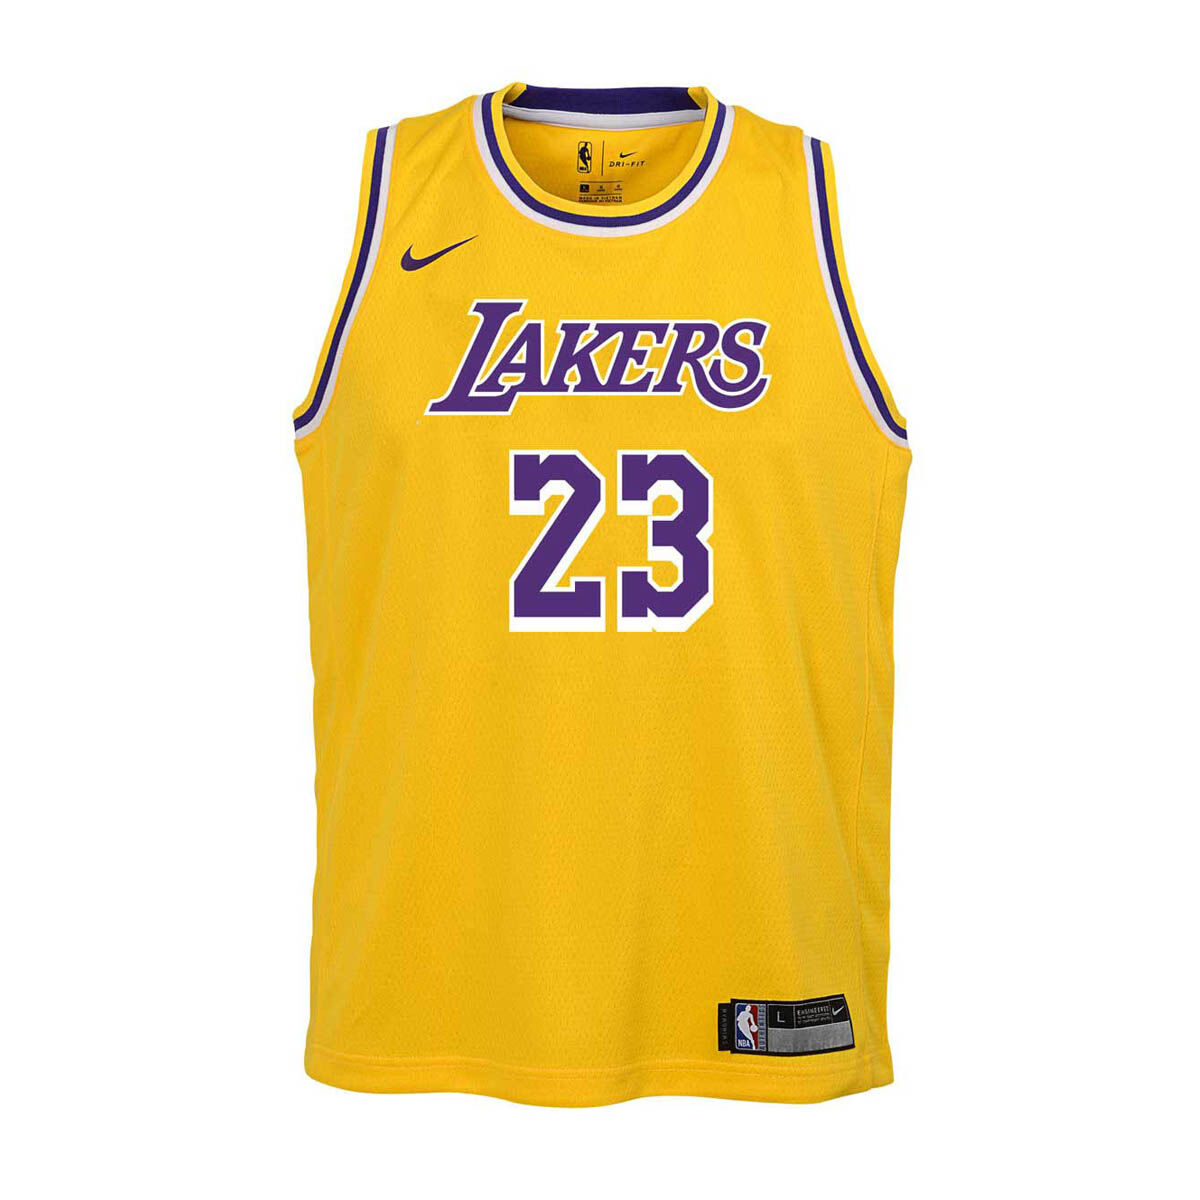 jersey of lakers Off 63% - www.bashhguidelines.org